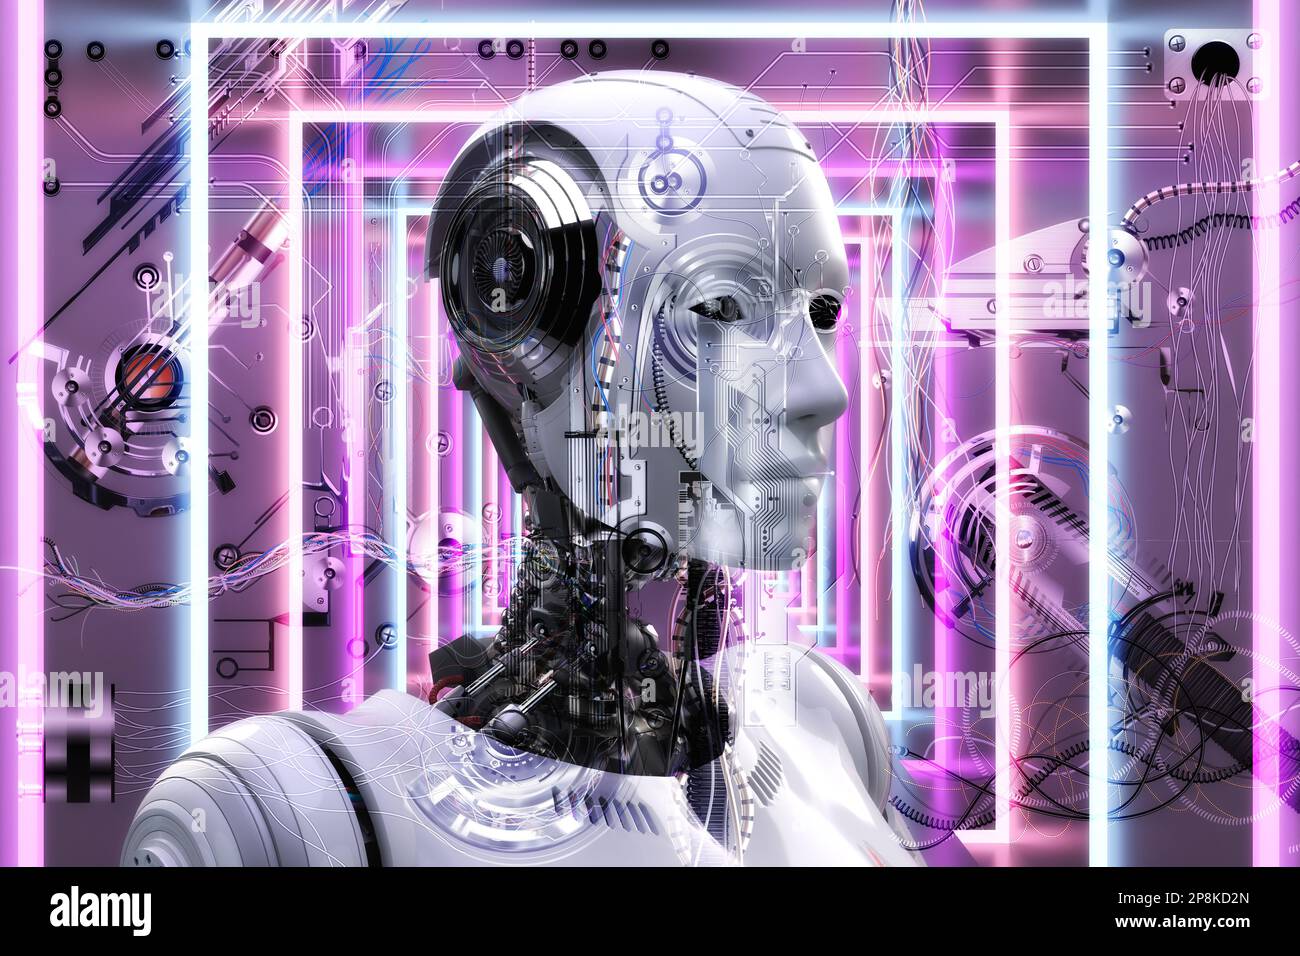 Artistic 3D Illustration Of A Cyborg With Artificial Intelligence Stock Photo